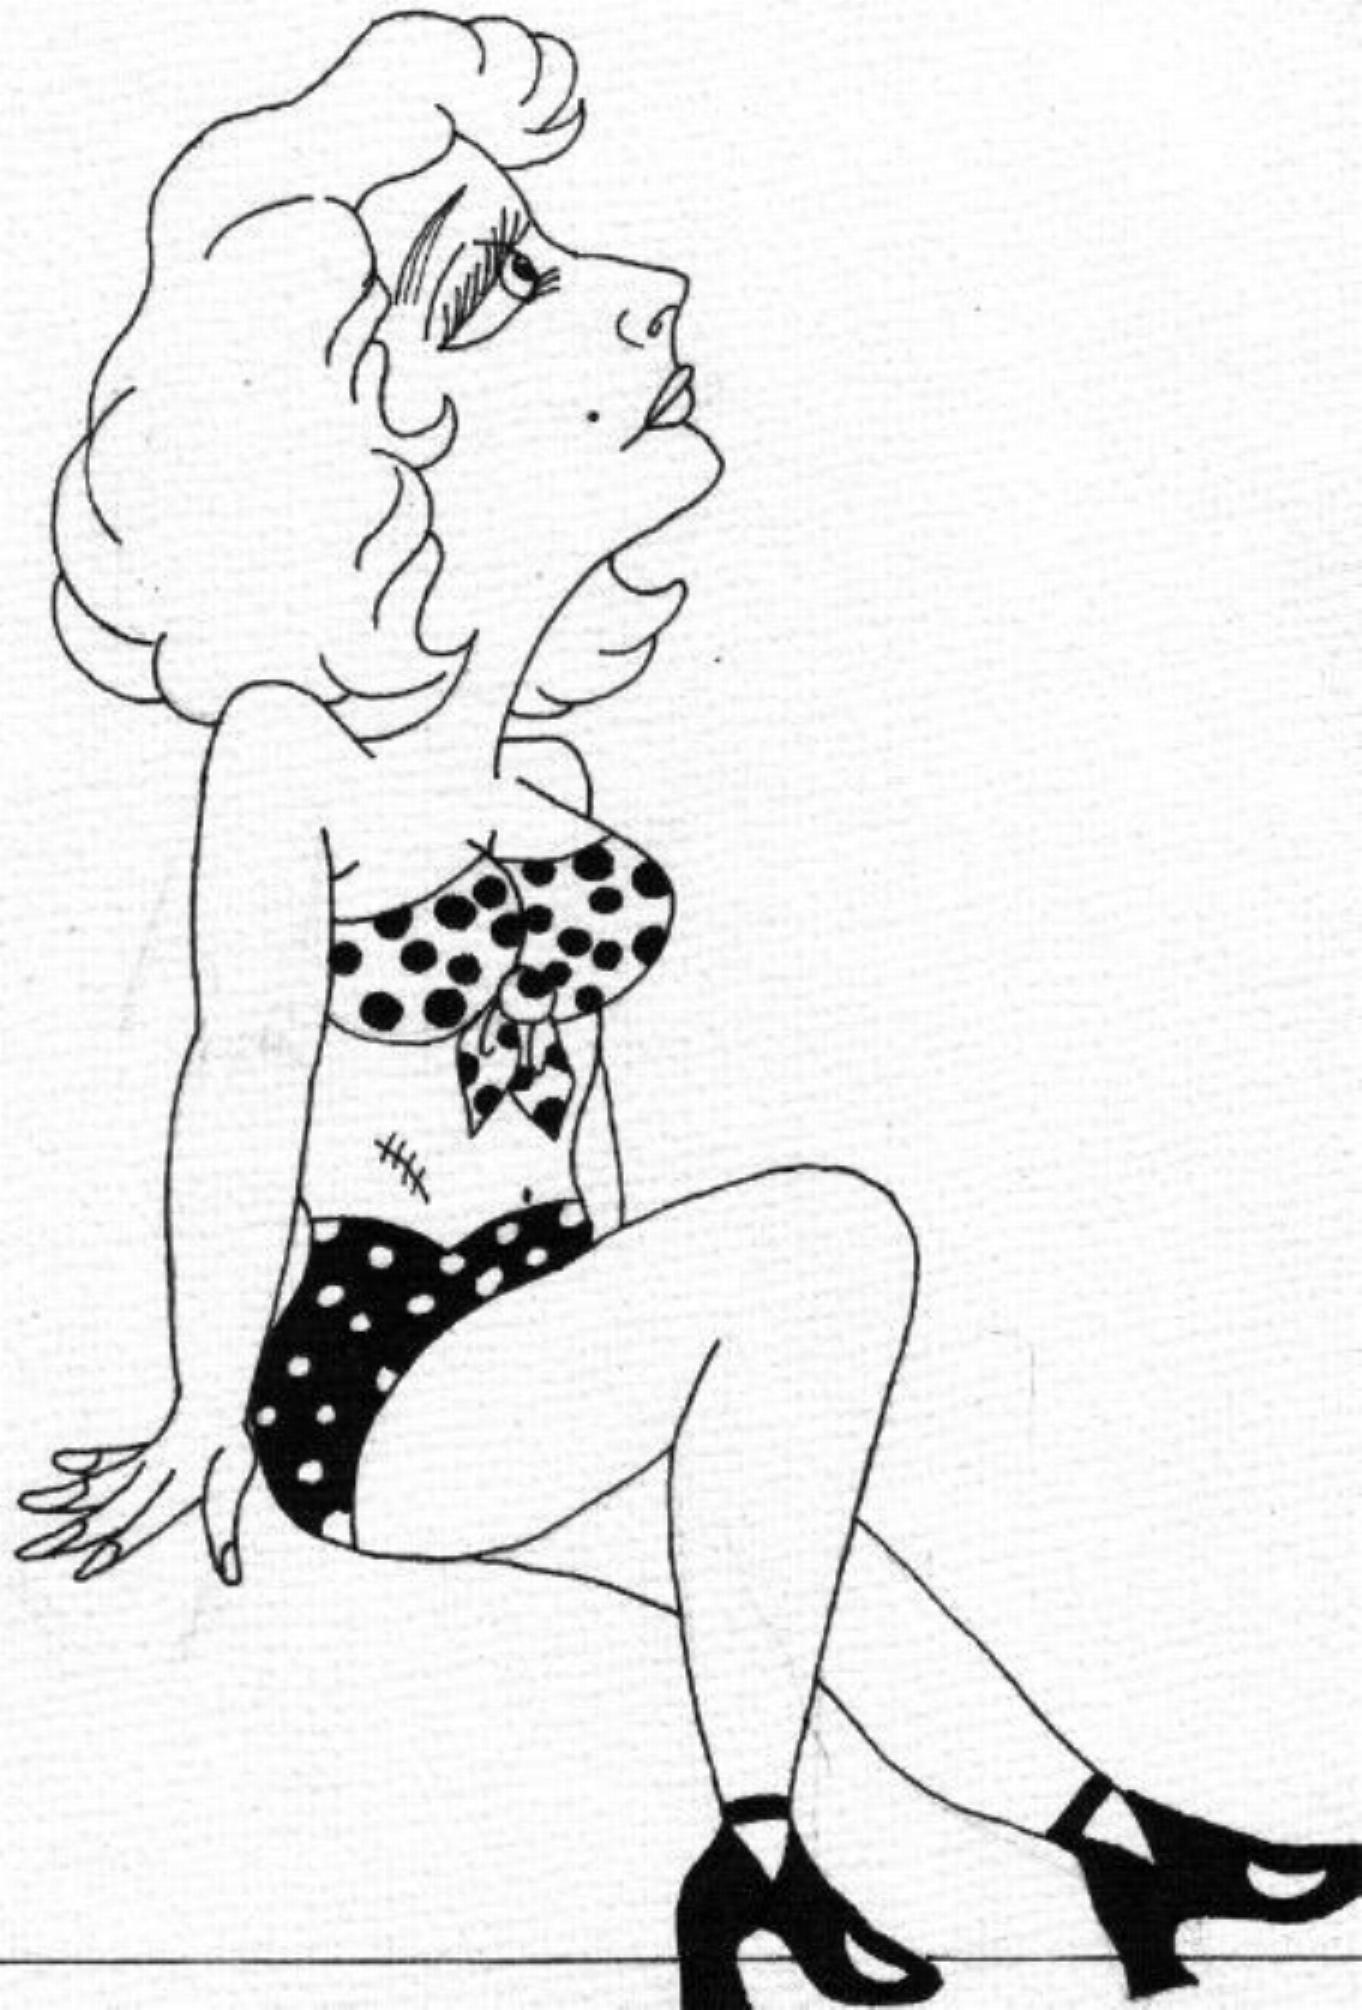 Caricature by Marilyn